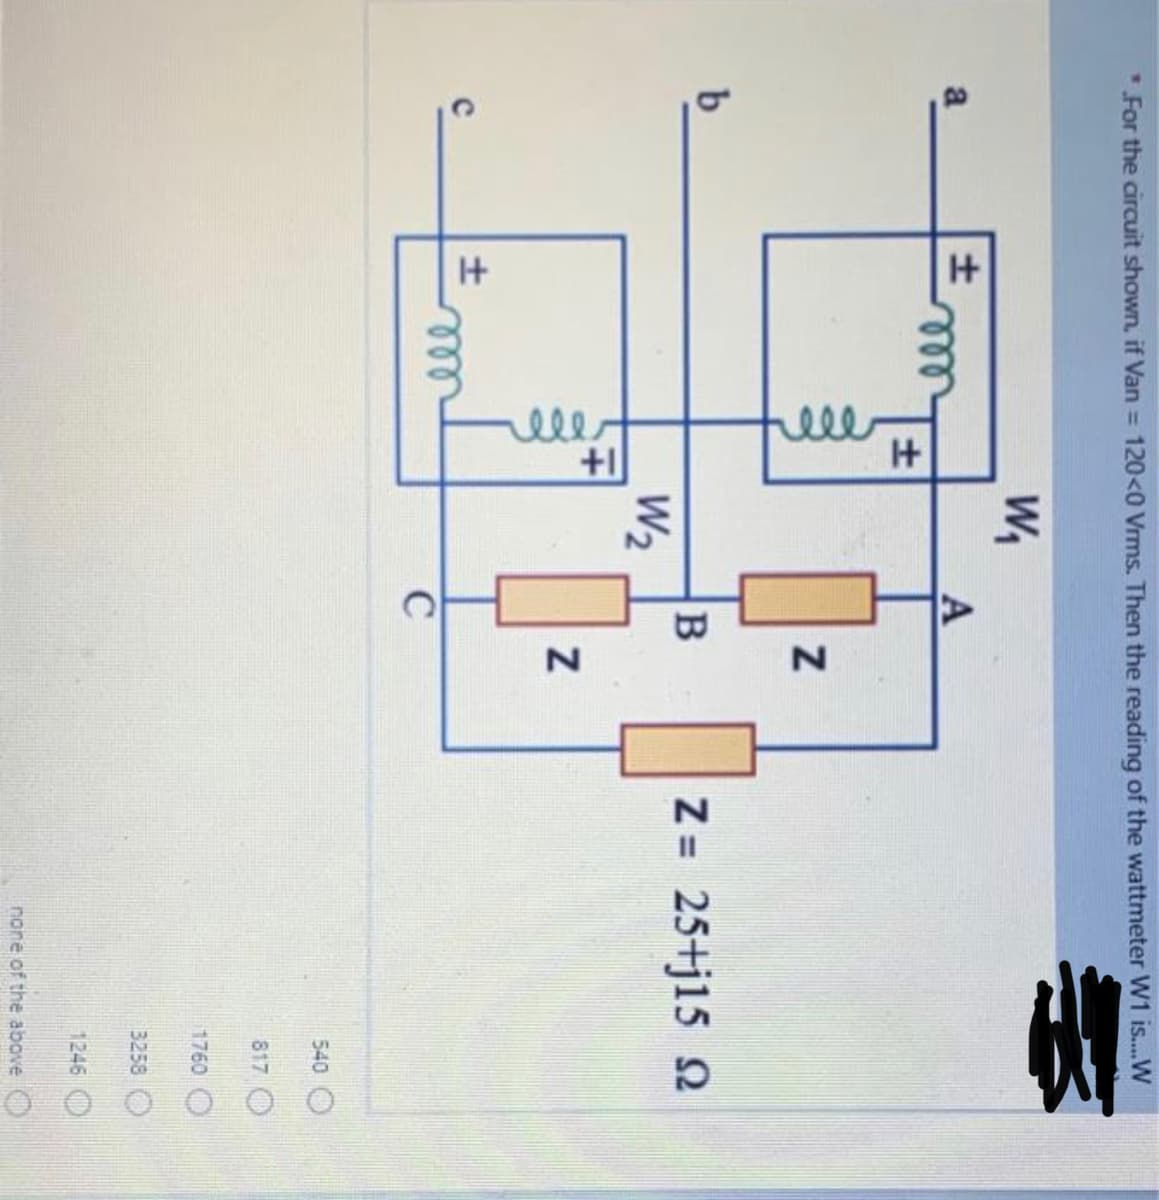 ele
elle
*For the circuit shown, if Van = 120<0 Vrms. Then the reading of the wattmeter W1 is..W
W,
a
A
ll
b.
Z= 25+j15 2
%3D
W2
all
C
540 O
817 O
1760
3258
1246
none of the above O
